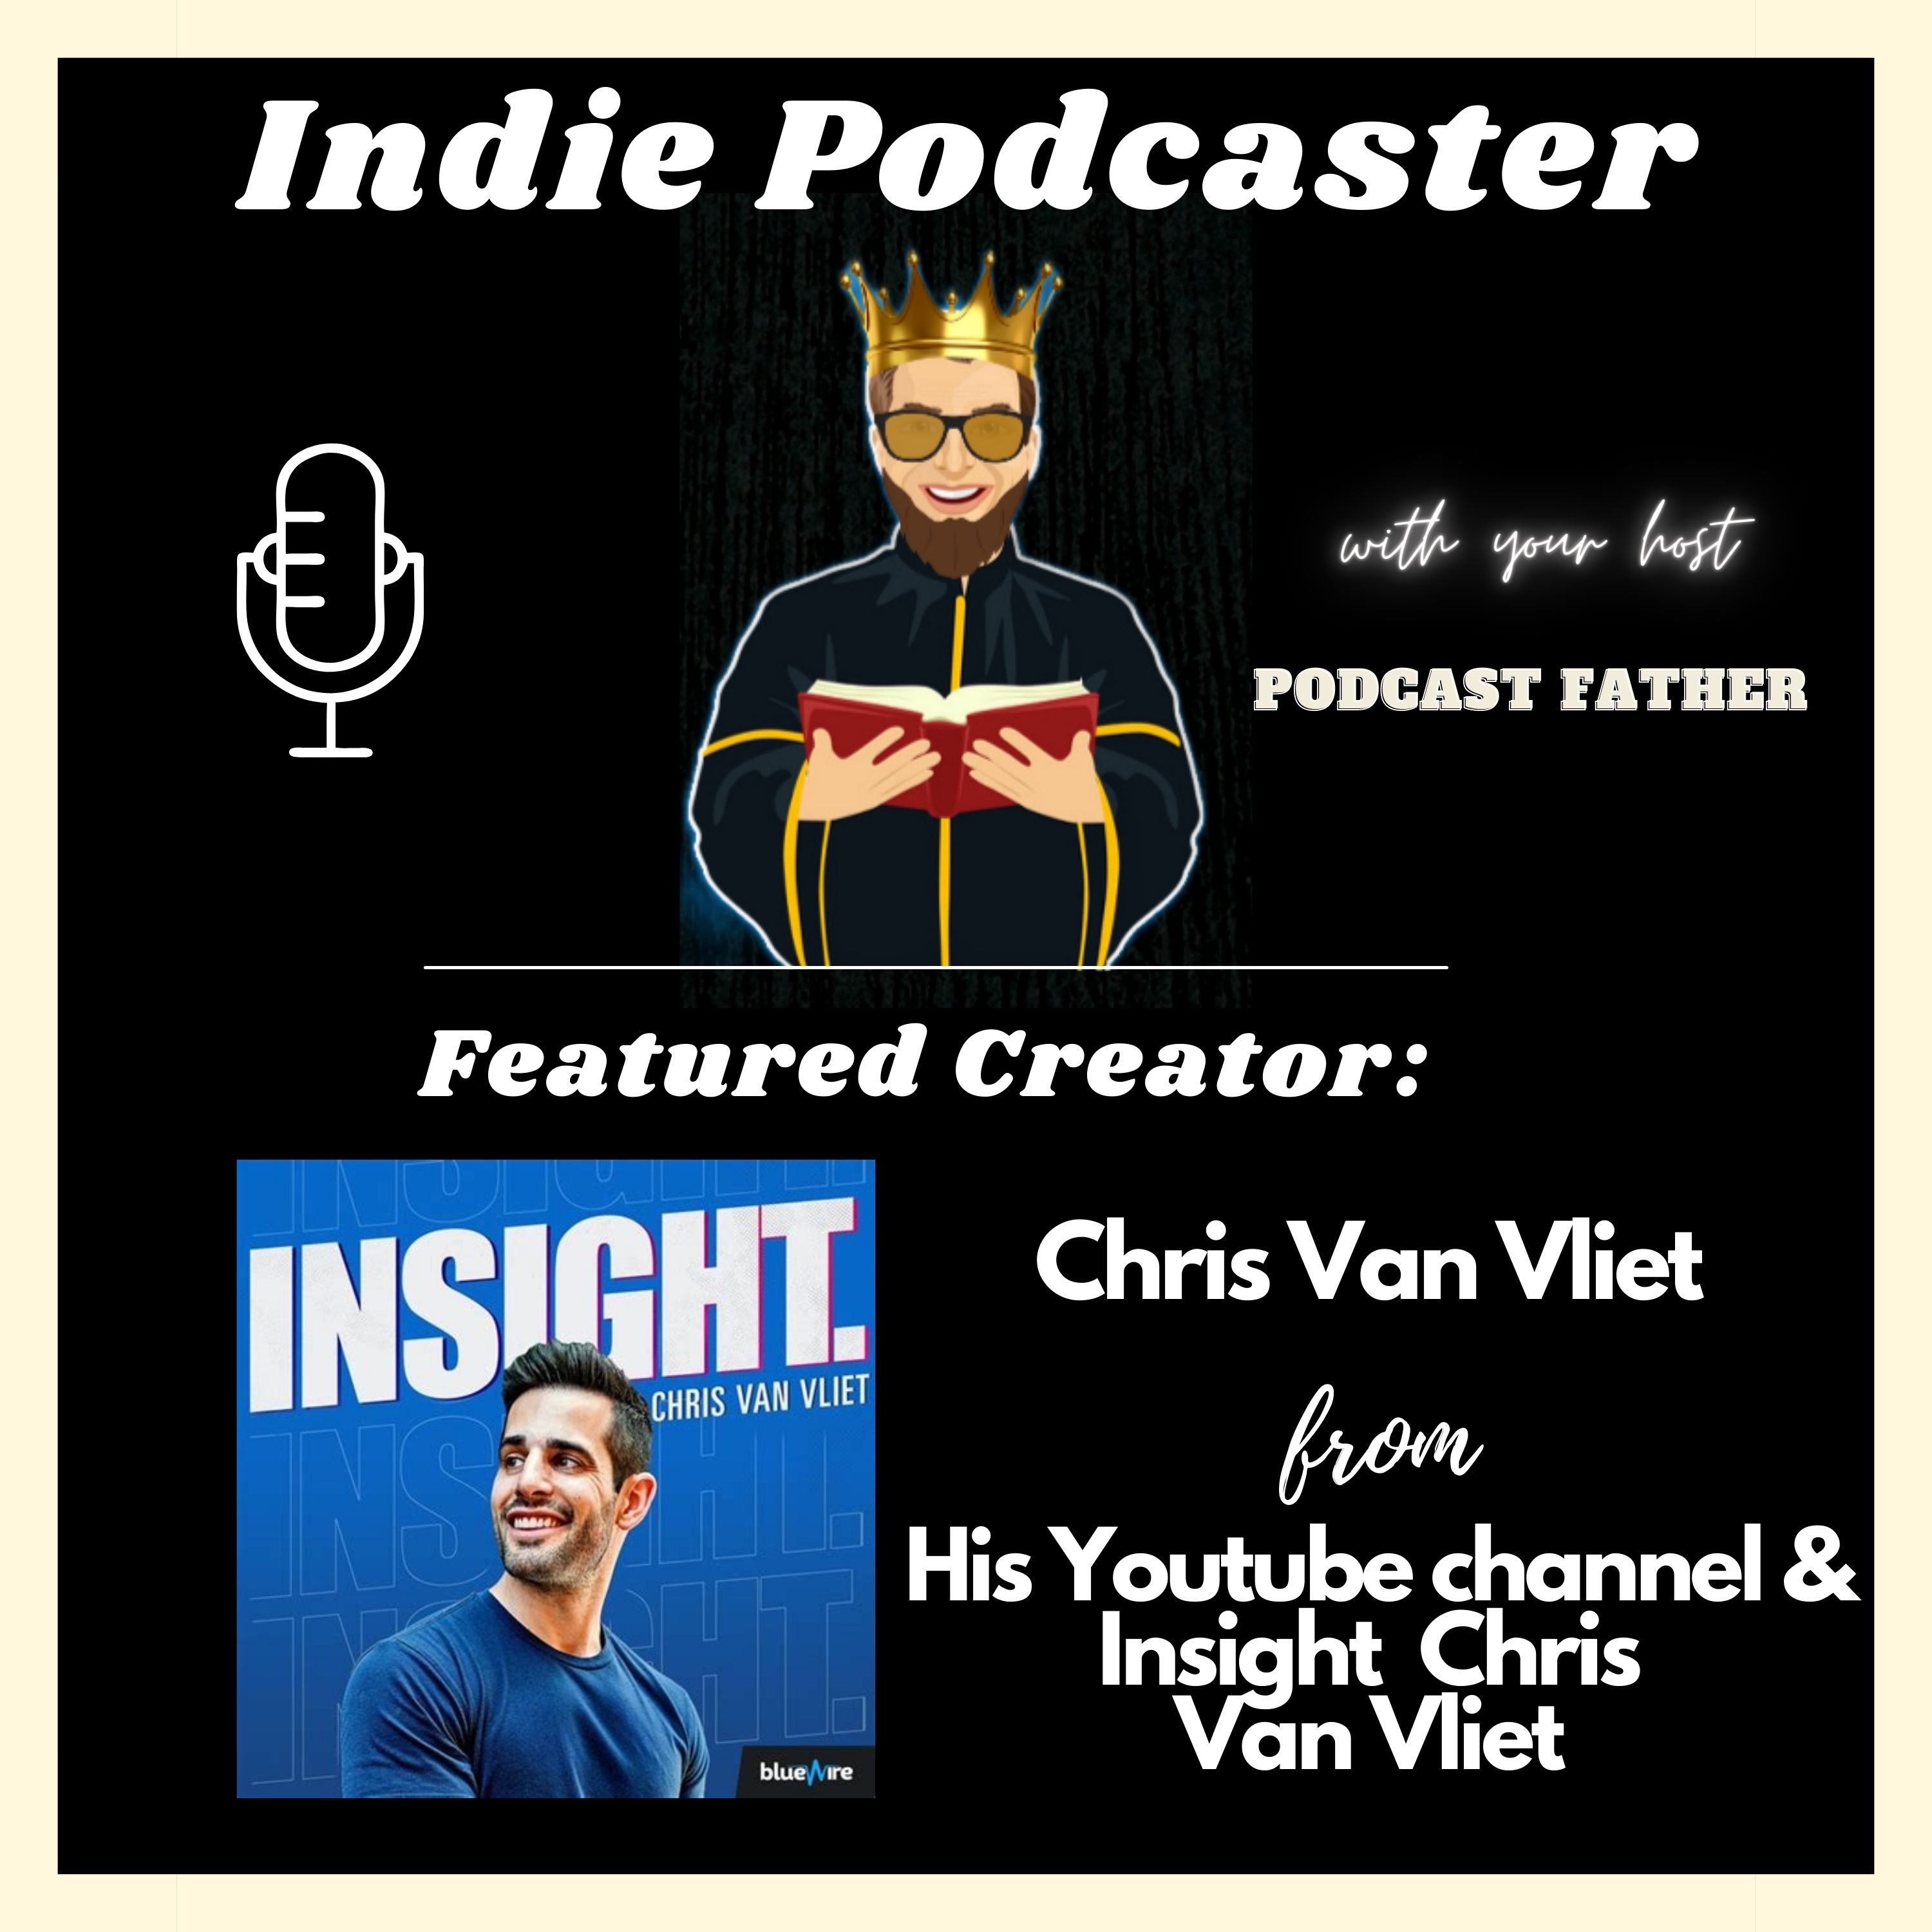 Chris Van Vliet the YouTuber and Podcaster Image